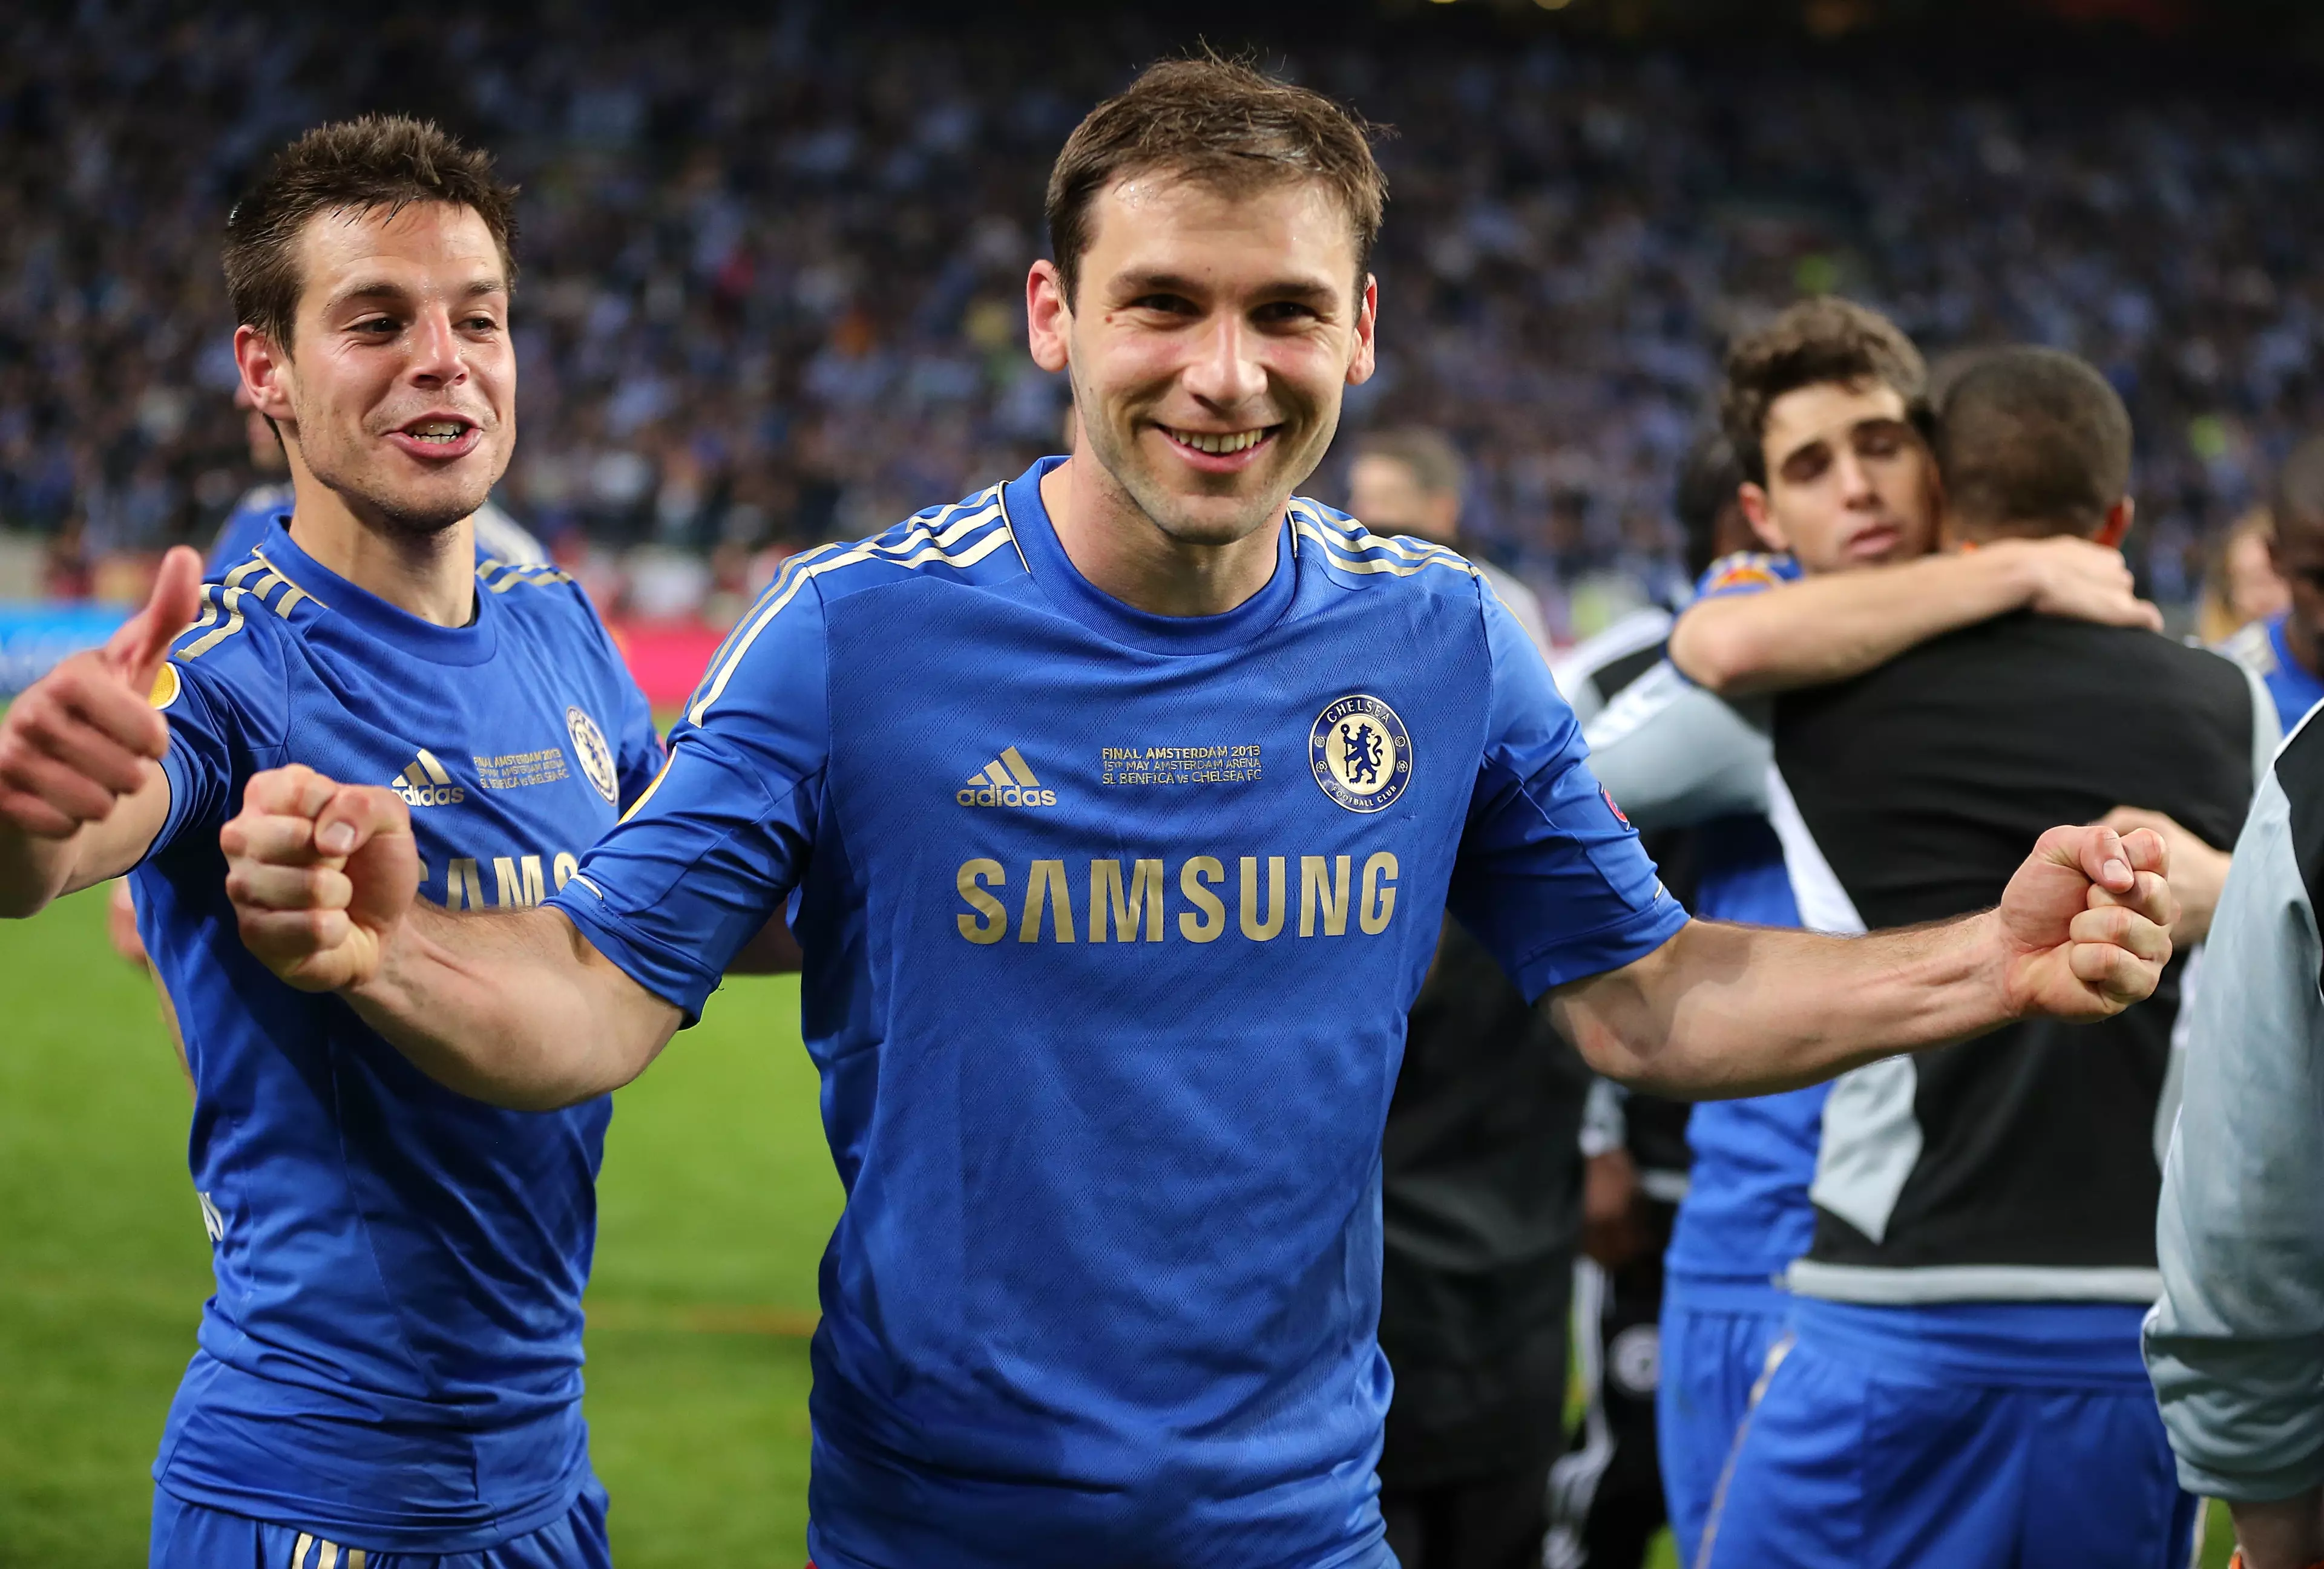 Ivanovic could be back in the Premier League soon. Image: PA Images